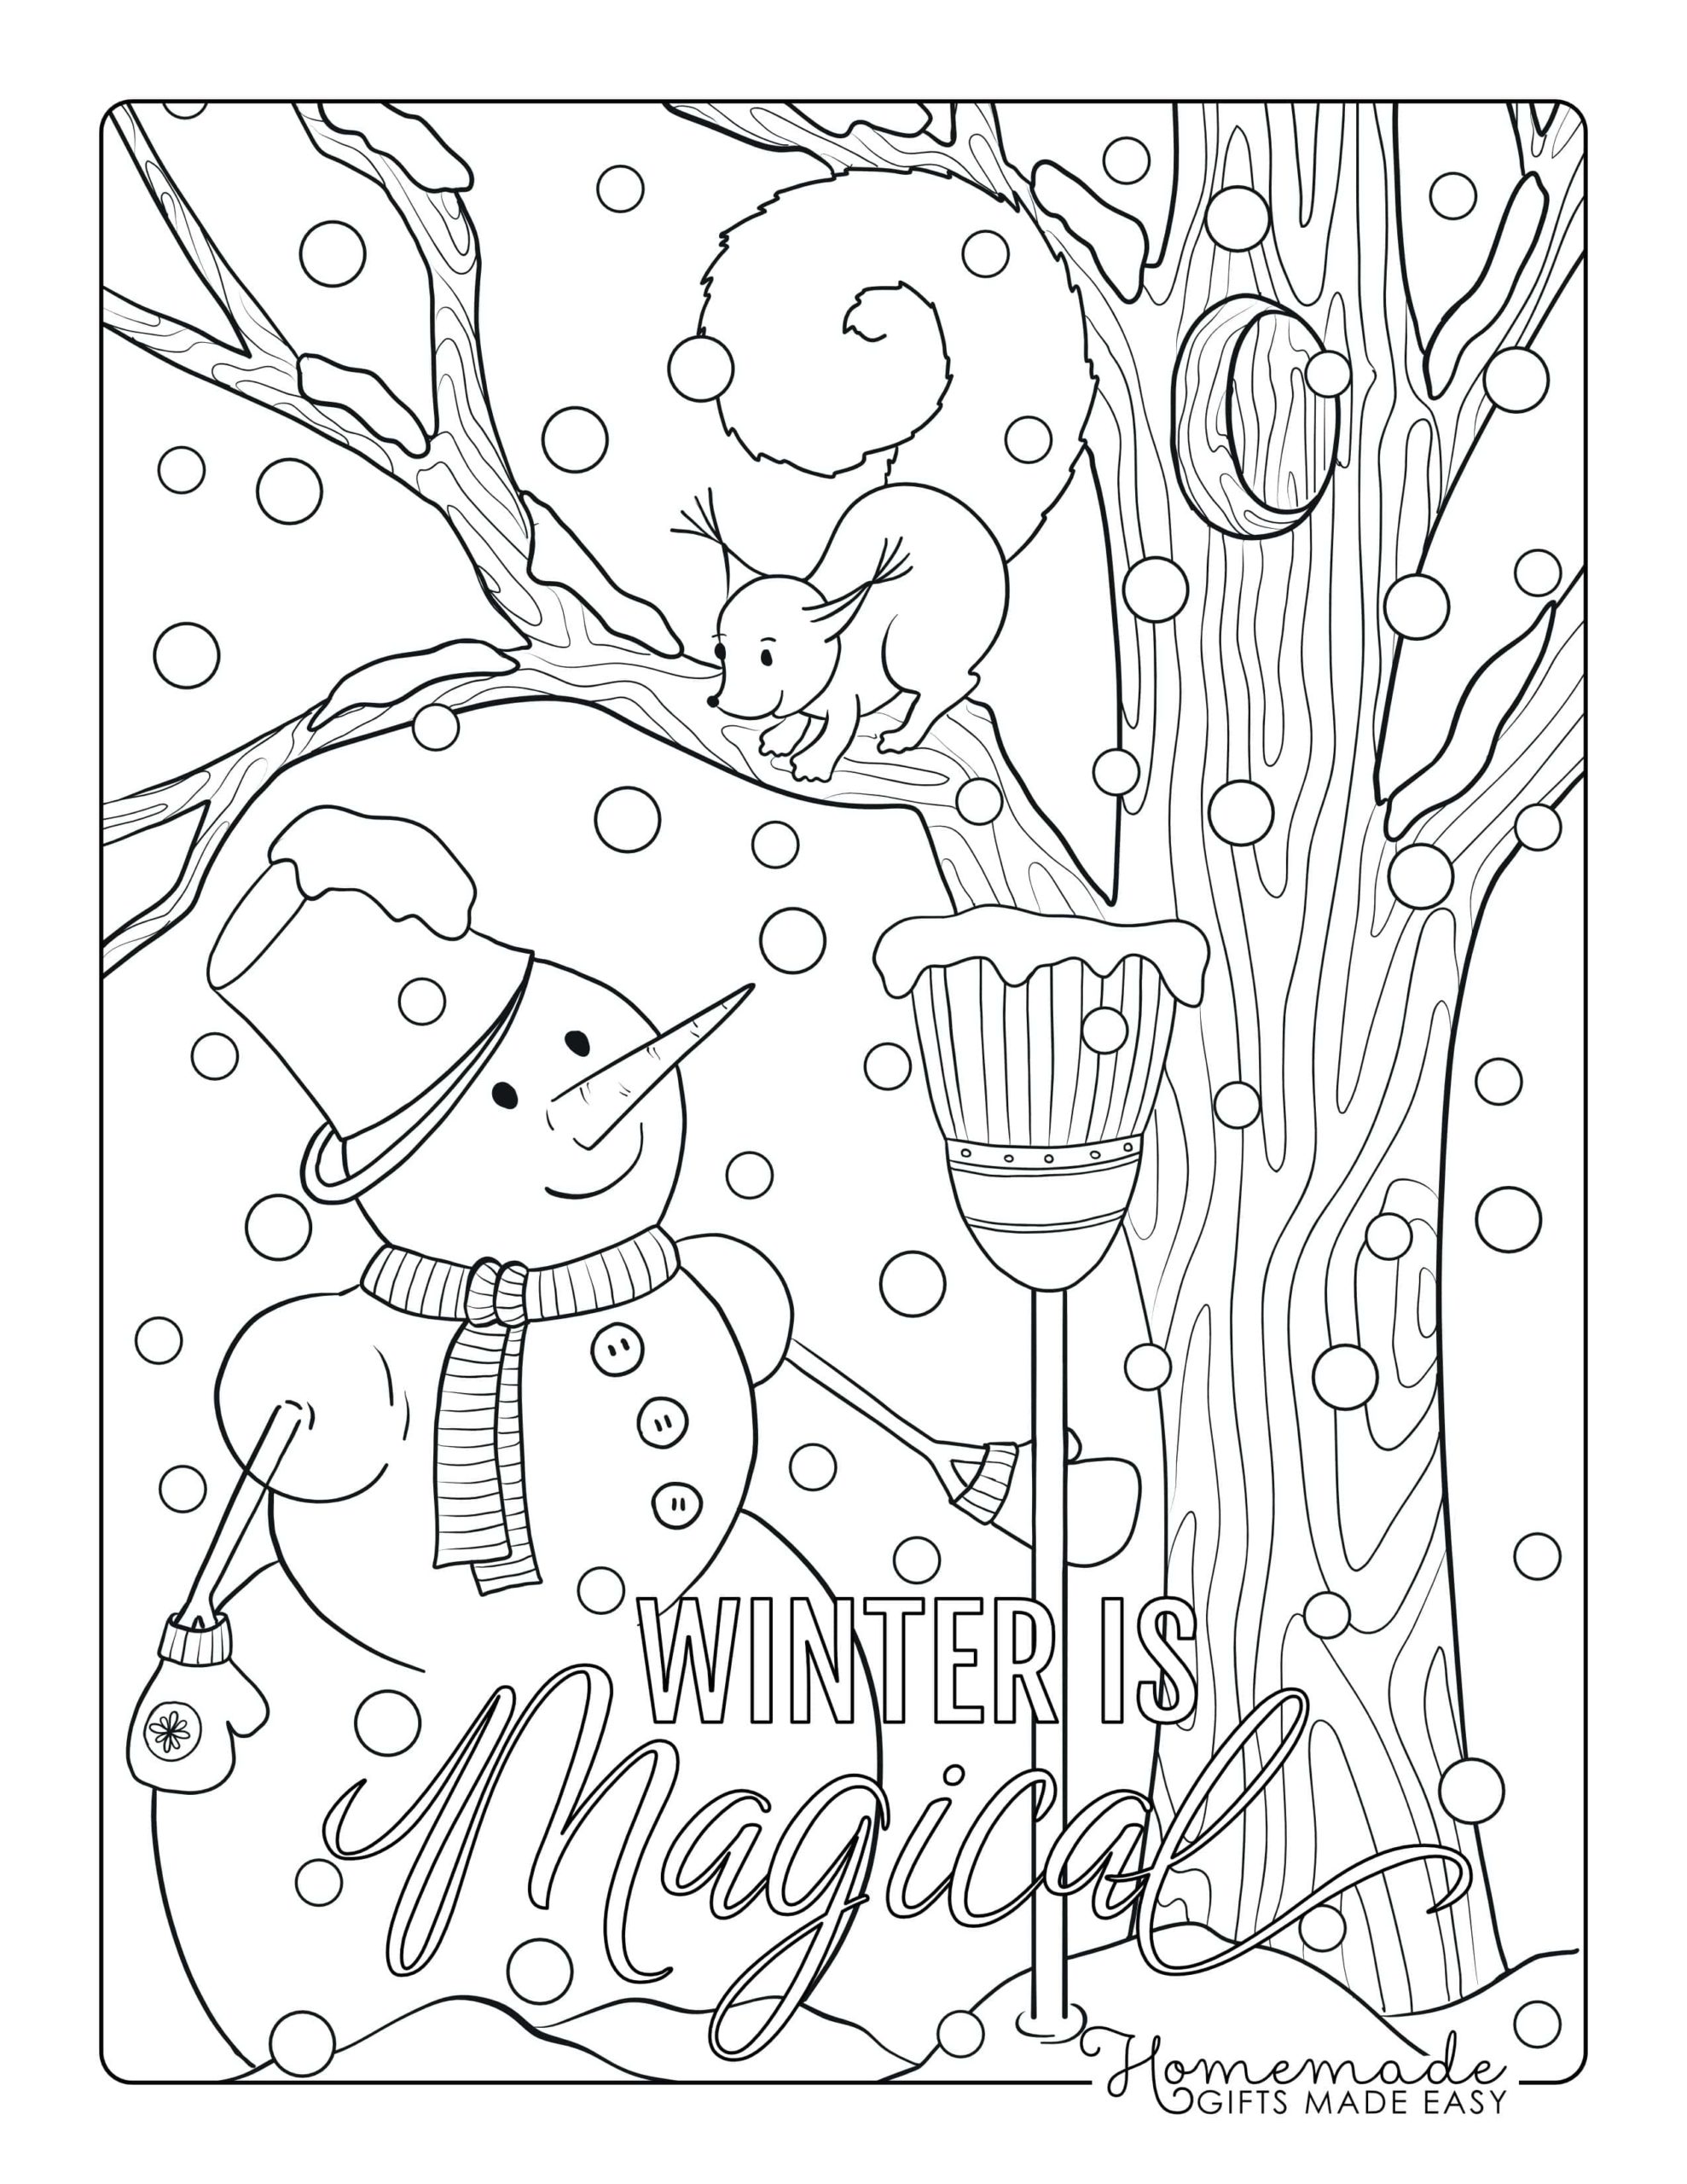 Printable Winter Coloring Pages vlr eng br